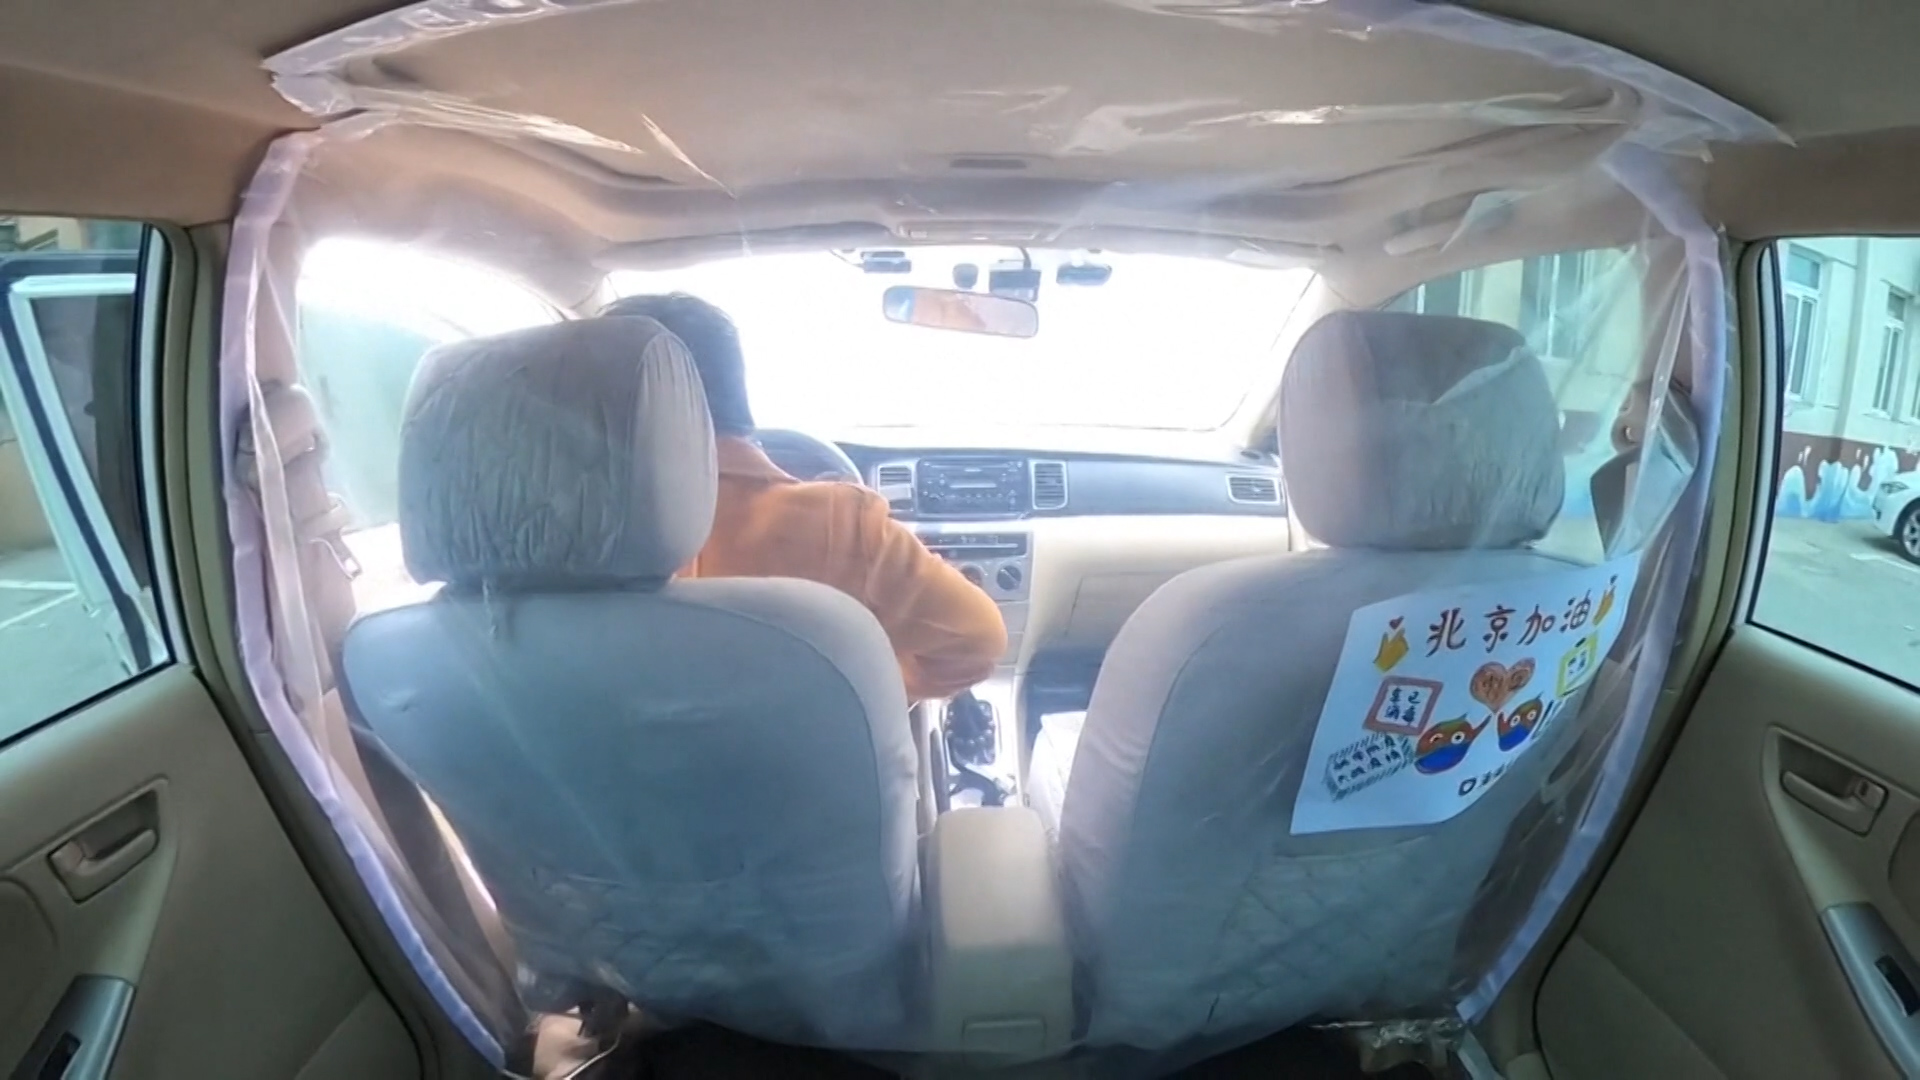 Ride Sharing Service In China Using Plastic Sheets To Prevent Coronavirus Spread Nbc 6 South Florida